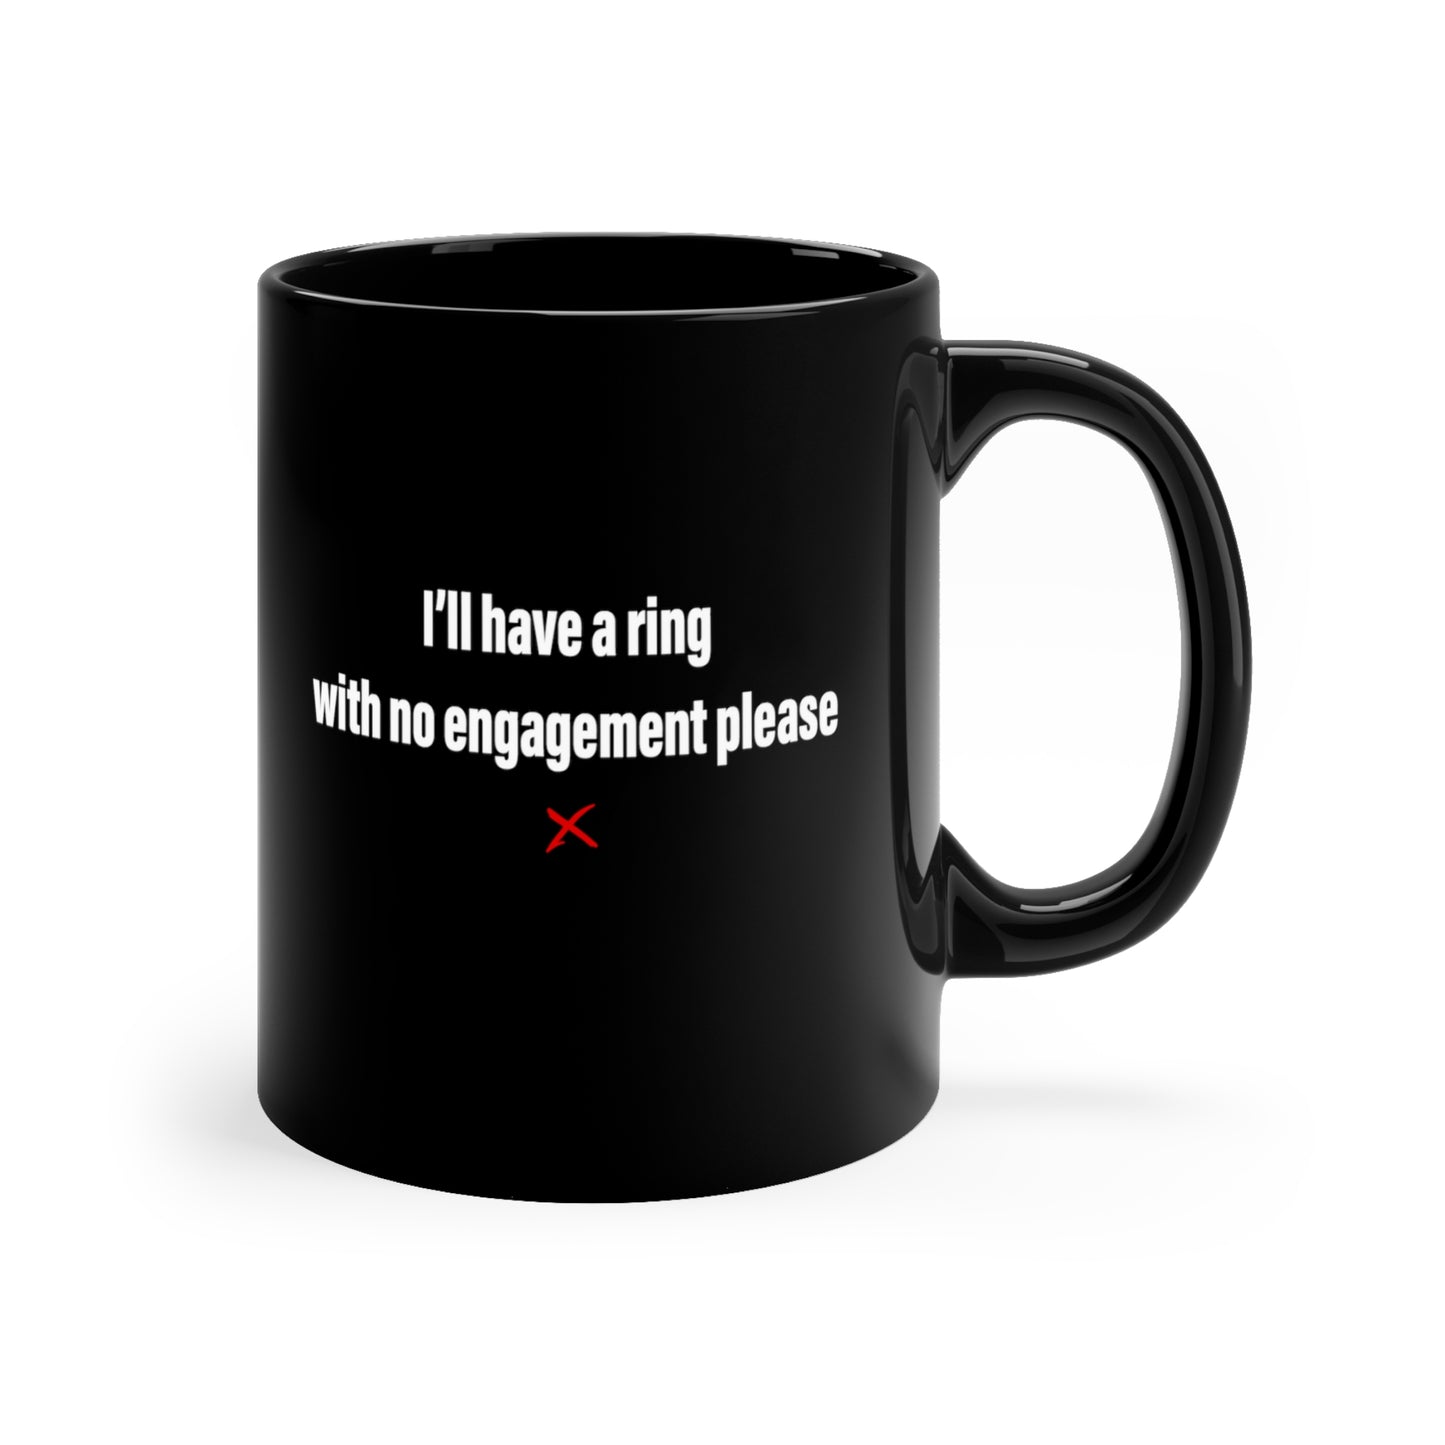 I'll have a ring with no engagement please - Mug